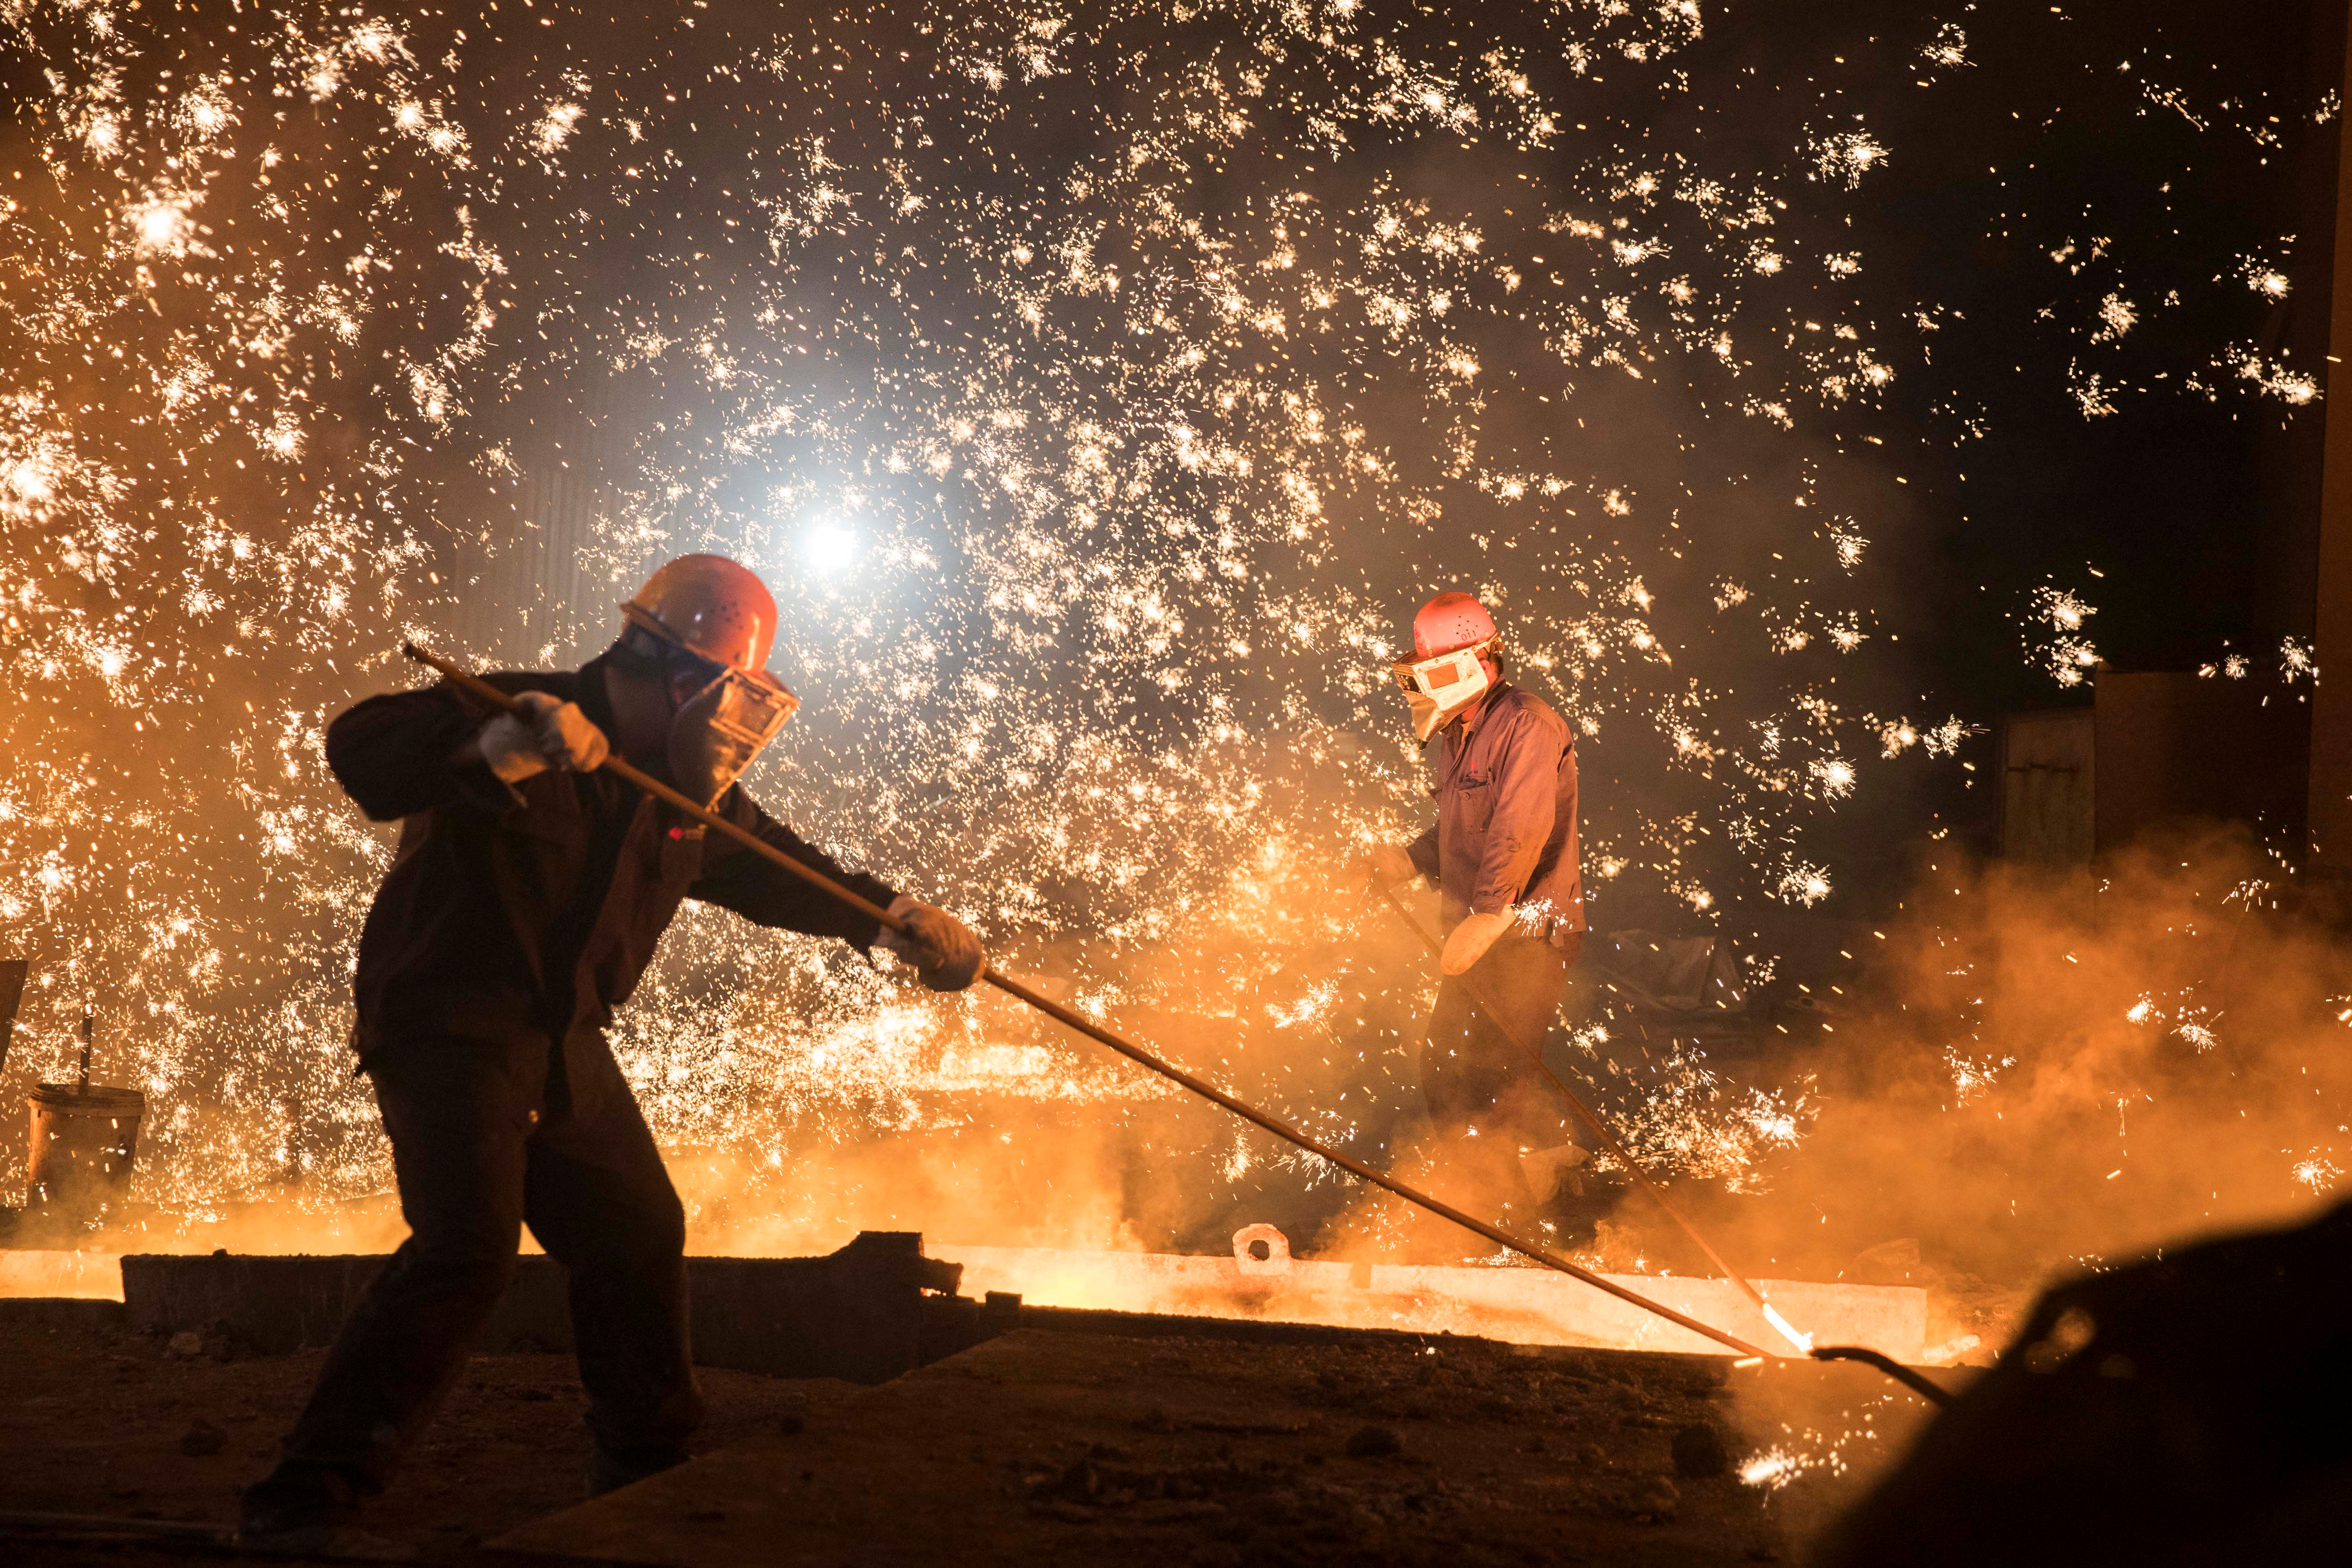 Laborers work at a steel plant of Shandong Iron & Steel Group in Jinan